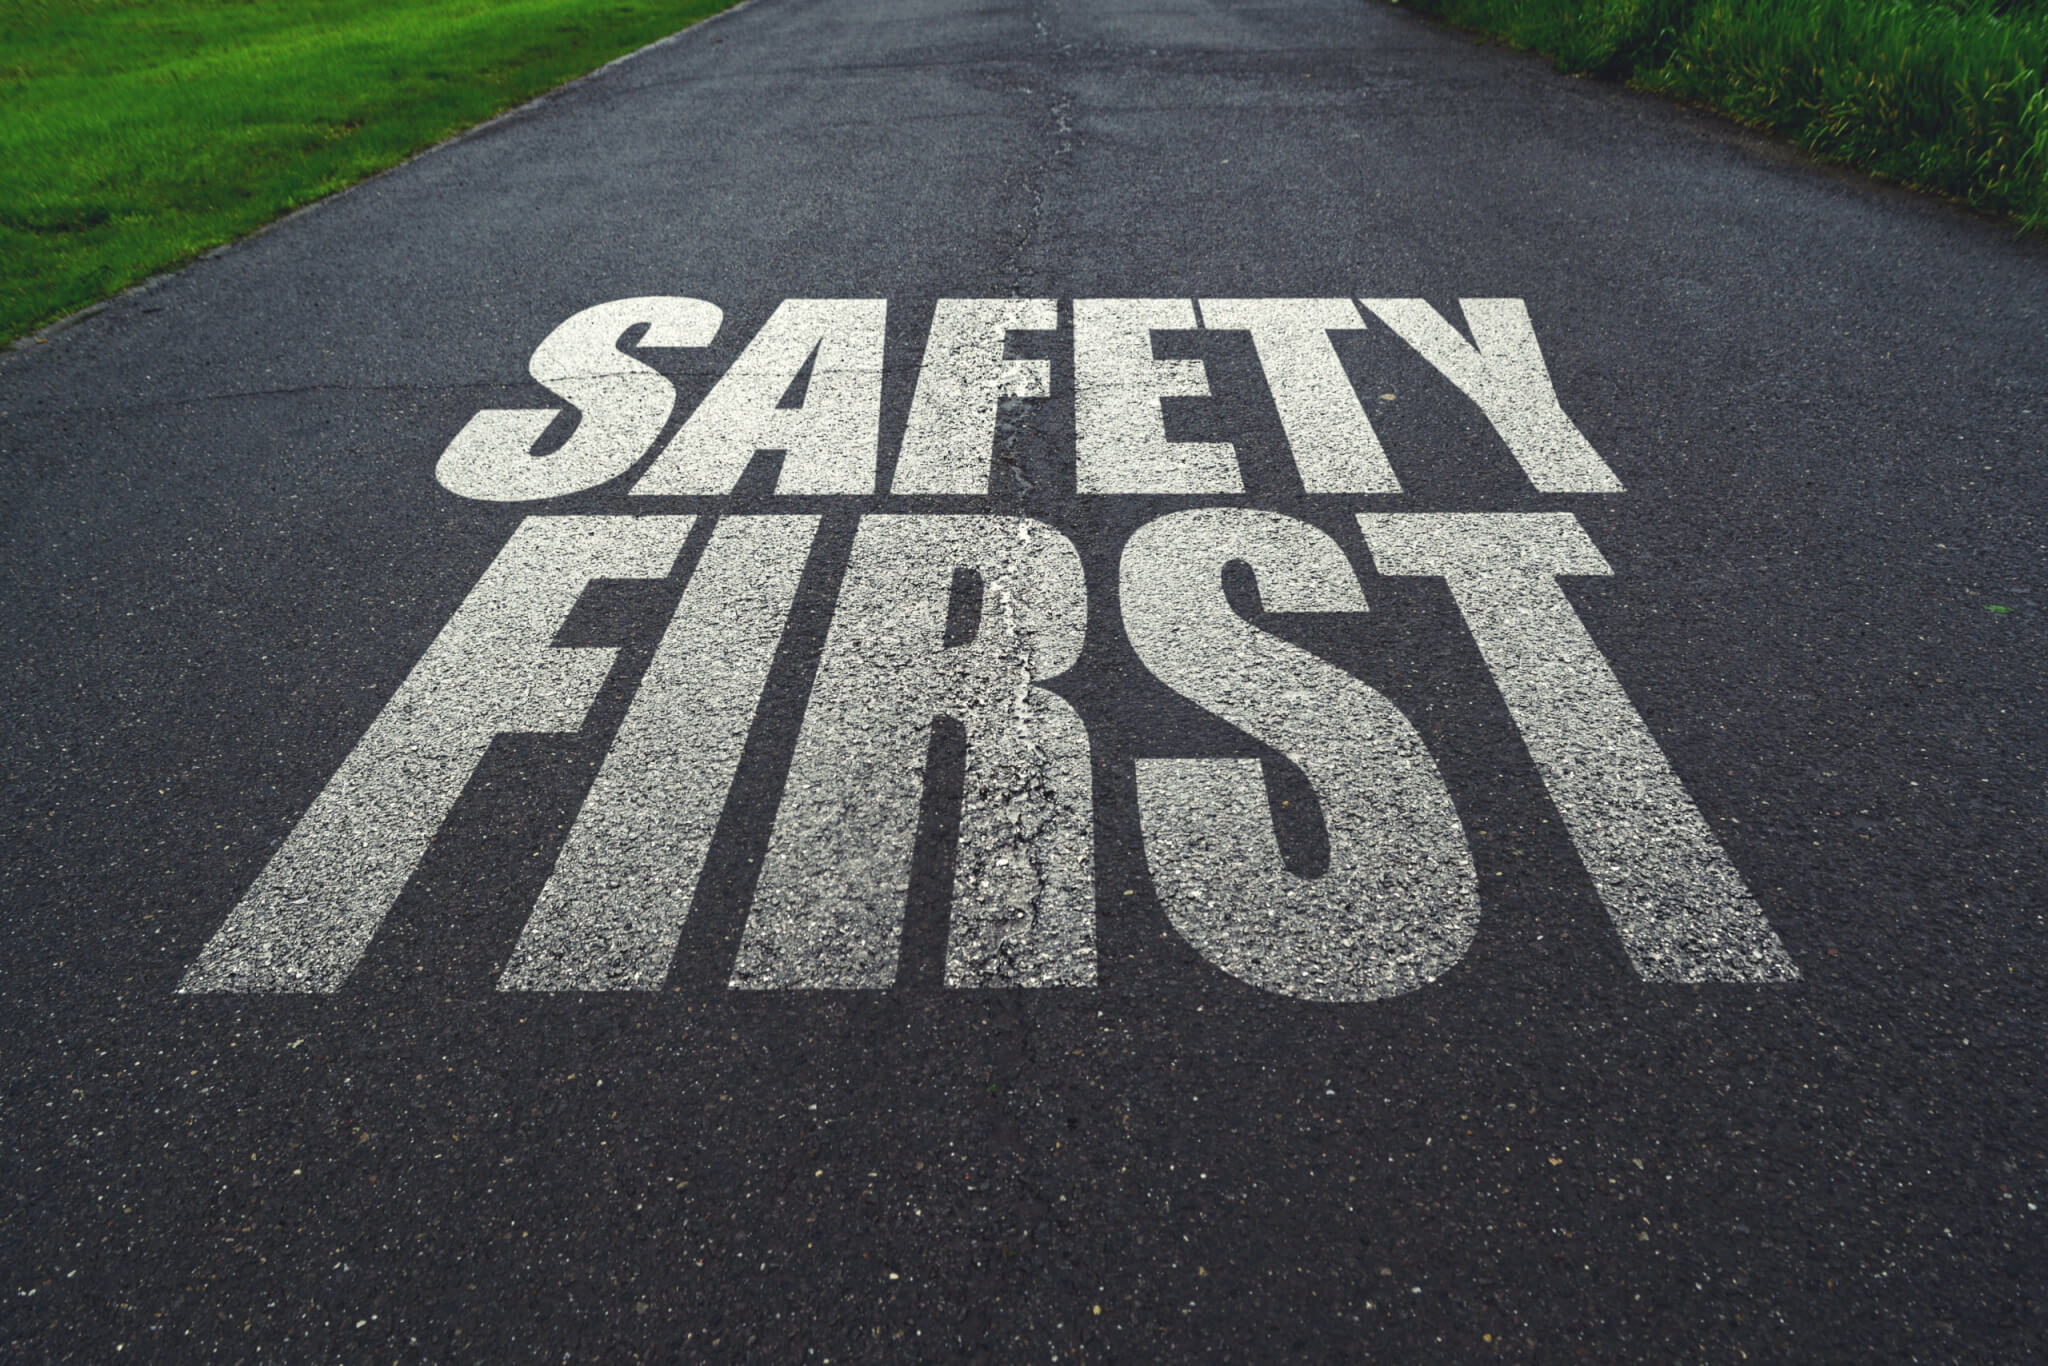 Behind the Wheel: The Critical Importance of Safe Driving